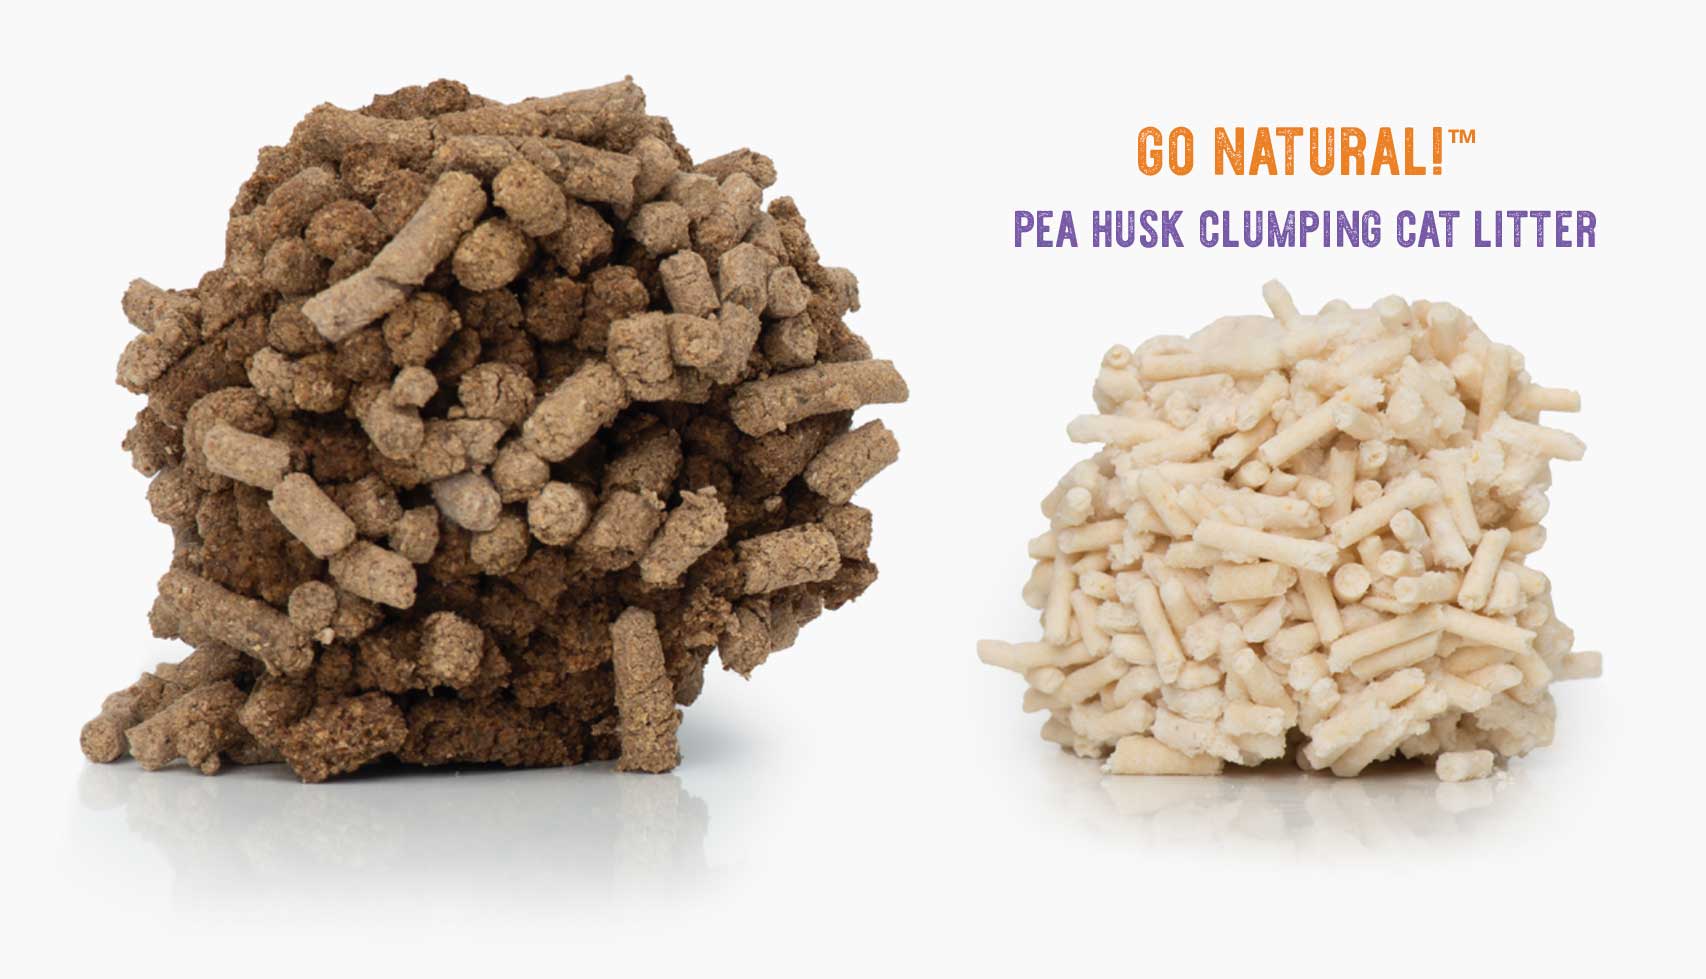 Pea husk clumping cat litter lasts longer and forms tighter clumps